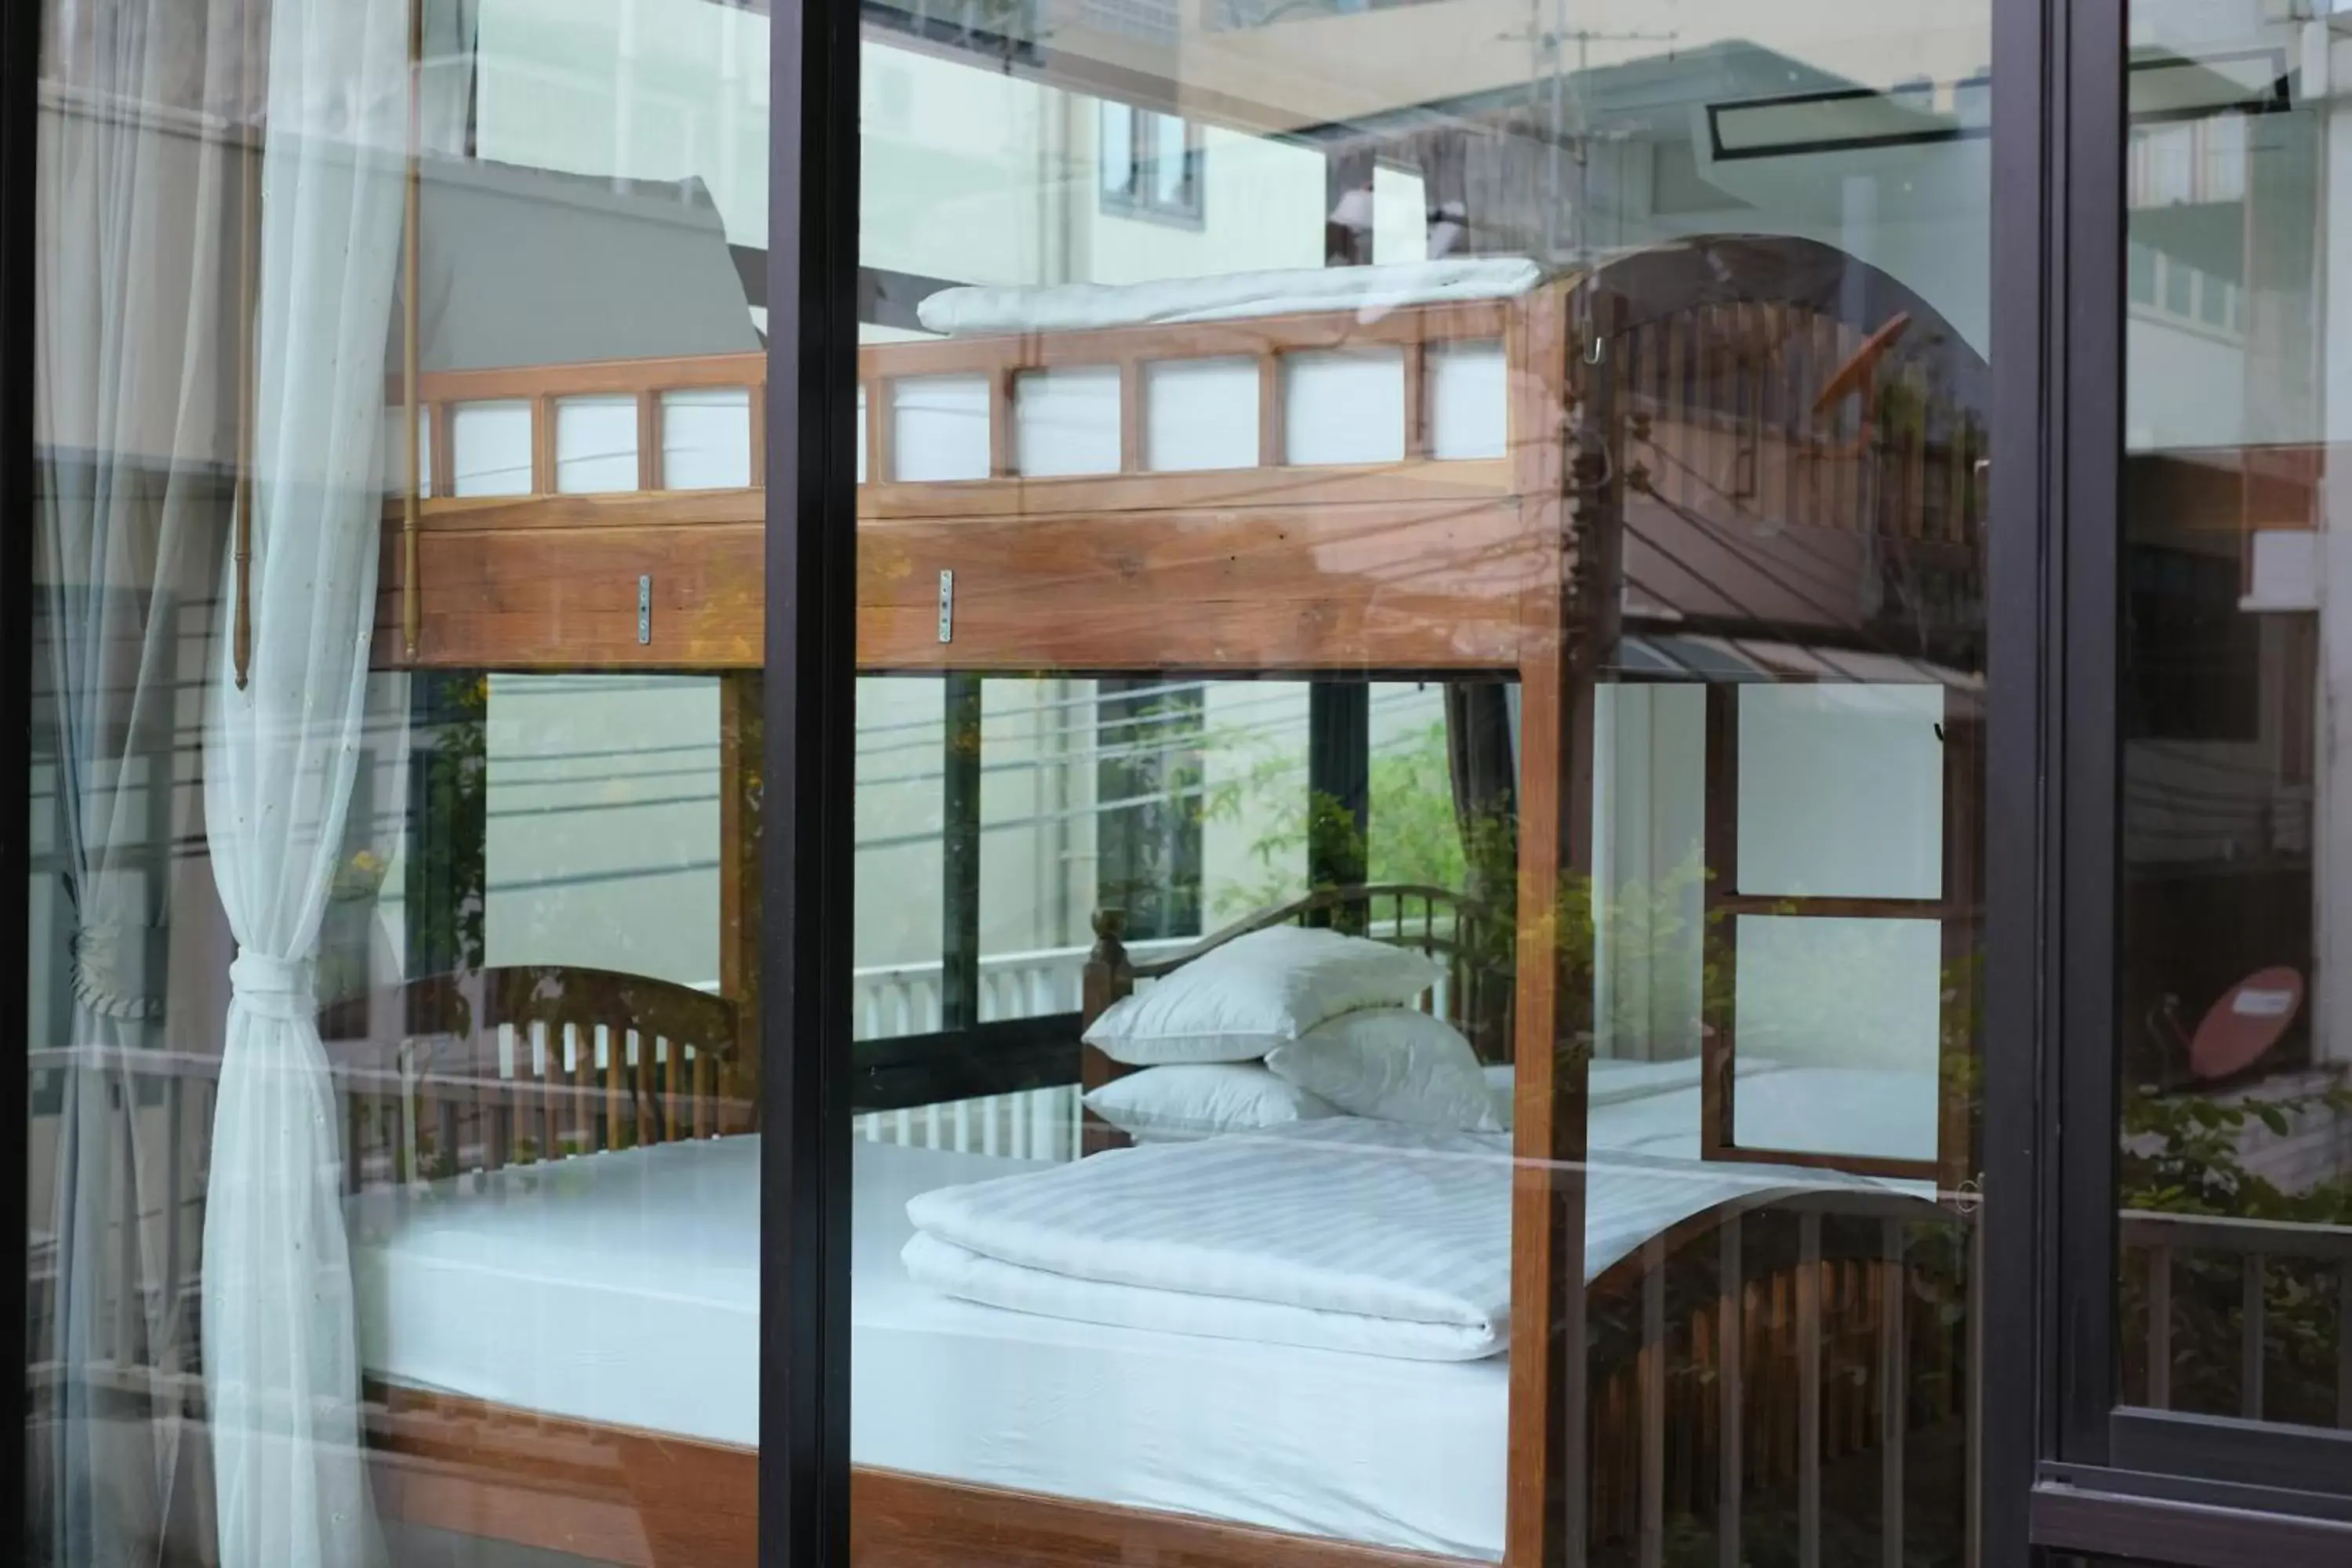 bunk bed in Feung Nakorn Balcony Rooms and Cafe